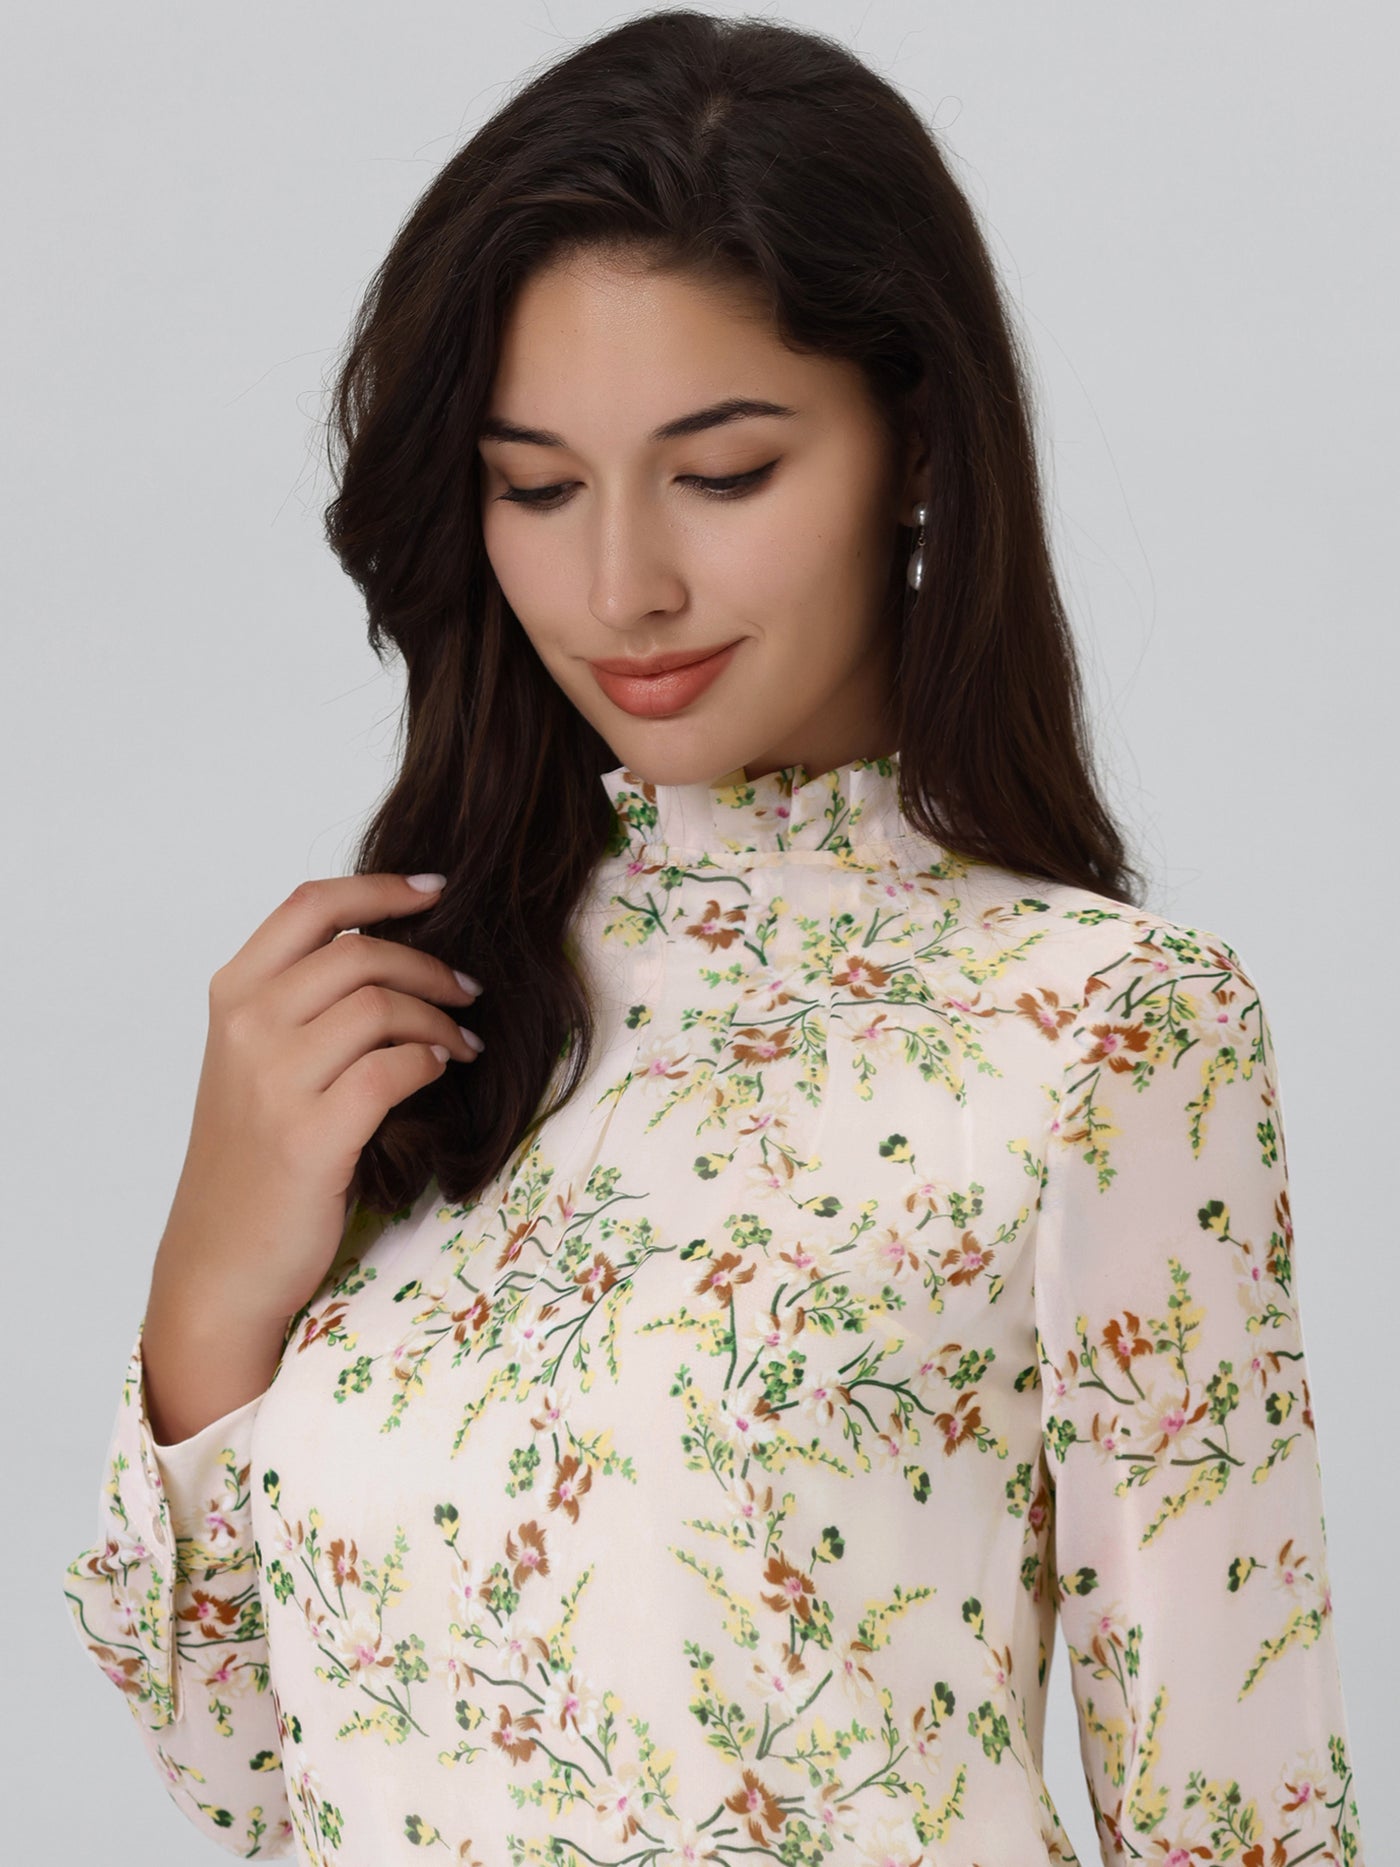 Bublédon Women's Floral Shirt Pleated Ruffled Stand Collar Blouse